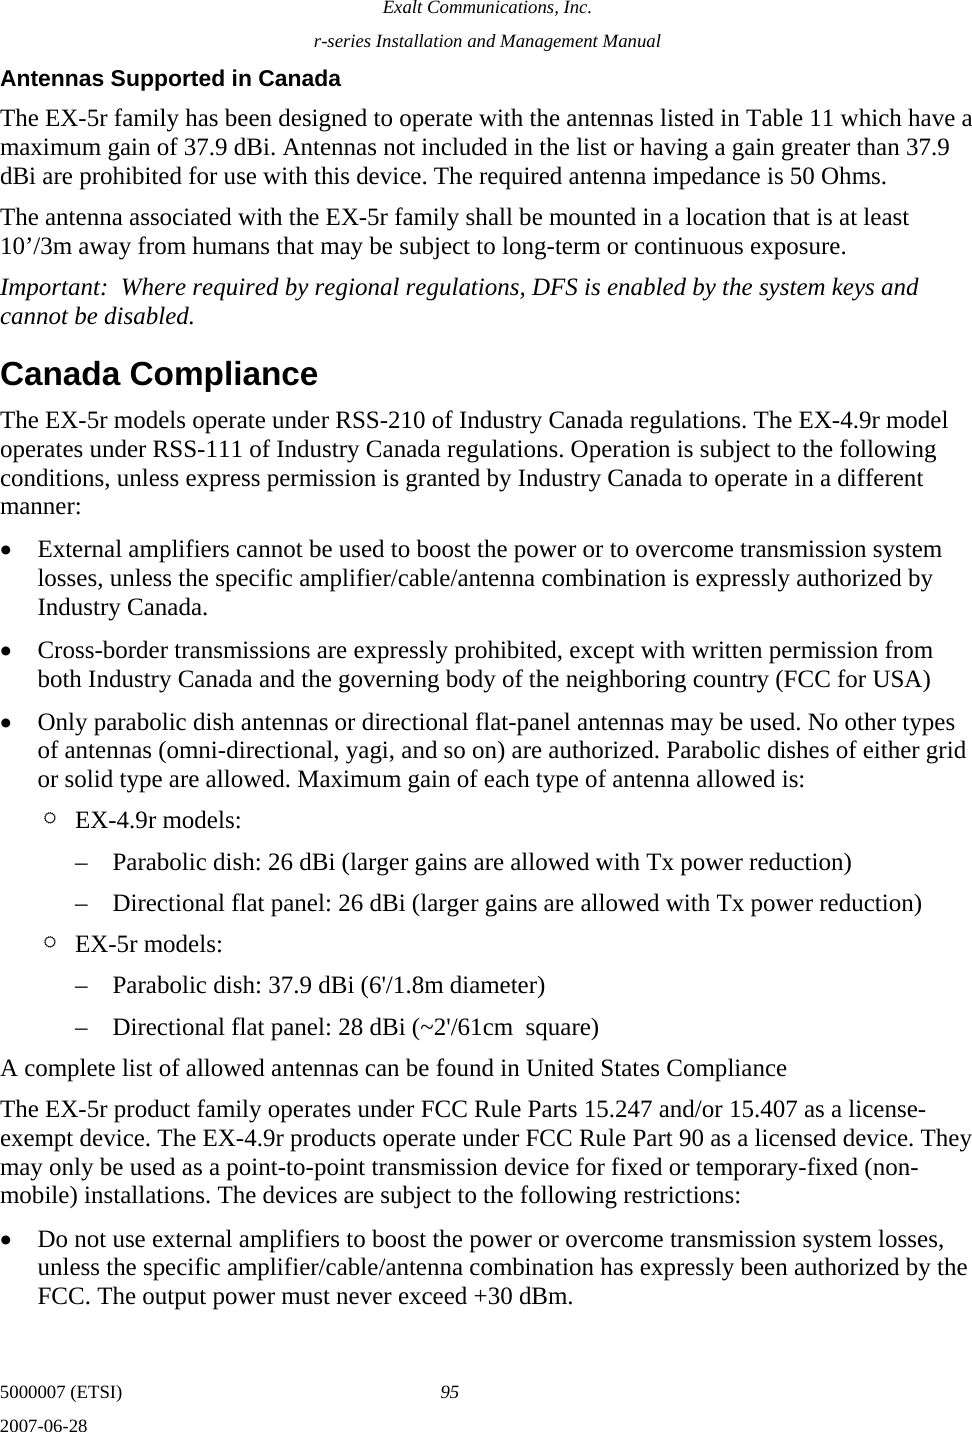 Exalt Communications, Inc. r-series Installation and Management Manual 5000007 (ETSI)  95 2007-06-28  Antennas Supported in Canada The EX-5r family has been designed to operate with the antennas listed in Table 11 which have a maximum gain of 37.9 dBi. Antennas not included in the list or having a gain greater than 37.9 dBi are prohibited for use with this device. The required antenna impedance is 50 Ohms. The antenna associated with the EX-5r family shall be mounted in a location that is at least 10’/3m away from humans that may be subject to long-term or continuous exposure. Important:  Where required by regional regulations, DFS is enabled by the system keys and cannot be disabled. Canada Compliance The EX-5r models operate under RSS-210 of Industry Canada regulations. The EX-4.9r model operates under RSS-111 of Industry Canada regulations. Operation is subject to the following conditions, unless express permission is granted by Industry Canada to operate in a different manner: • External amplifiers cannot be used to boost the power or to overcome transmission system losses, unless the specific amplifier/cable/antenna combination is expressly authorized by Industry Canada. • Cross-border transmissions are expressly prohibited, except with written permission from both Industry Canada and the governing body of the neighboring country (FCC for USA) • Only parabolic dish antennas or directional flat-panel antennas may be used. No other types of antennas (omni-directional, yagi, and so on) are authorized. Parabolic dishes of either grid or solid type are allowed. Maximum gain of each type of antenna allowed is: ¶ EX-4.9r models: – Parabolic dish: 26 dBi (larger gains are allowed with Tx power reduction) – Directional flat panel: 26 dBi (larger gains are allowed with Tx power reduction) ¶ EX-5r models: – Parabolic dish: 37.9 dBi (6&apos;/1.8m diameter) – Directional flat panel: 28 dBi (~2&apos;/61cm  square) A complete list of allowed antennas can be found in United States Compliance The EX-5r product family operates under FCC Rule Parts 15.247 and/or 15.407 as a license-exempt device. The EX-4.9r products operate under FCC Rule Part 90 as a licensed device. They may only be used as a point-to-point transmission device for fixed or temporary-fixed (non-mobile) installations. The devices are subject to the following restrictions: • Do not use external amplifiers to boost the power or overcome transmission system losses, unless the specific amplifier/cable/antenna combination has expressly been authorized by the FCC. The output power must never exceed +30 dBm. 